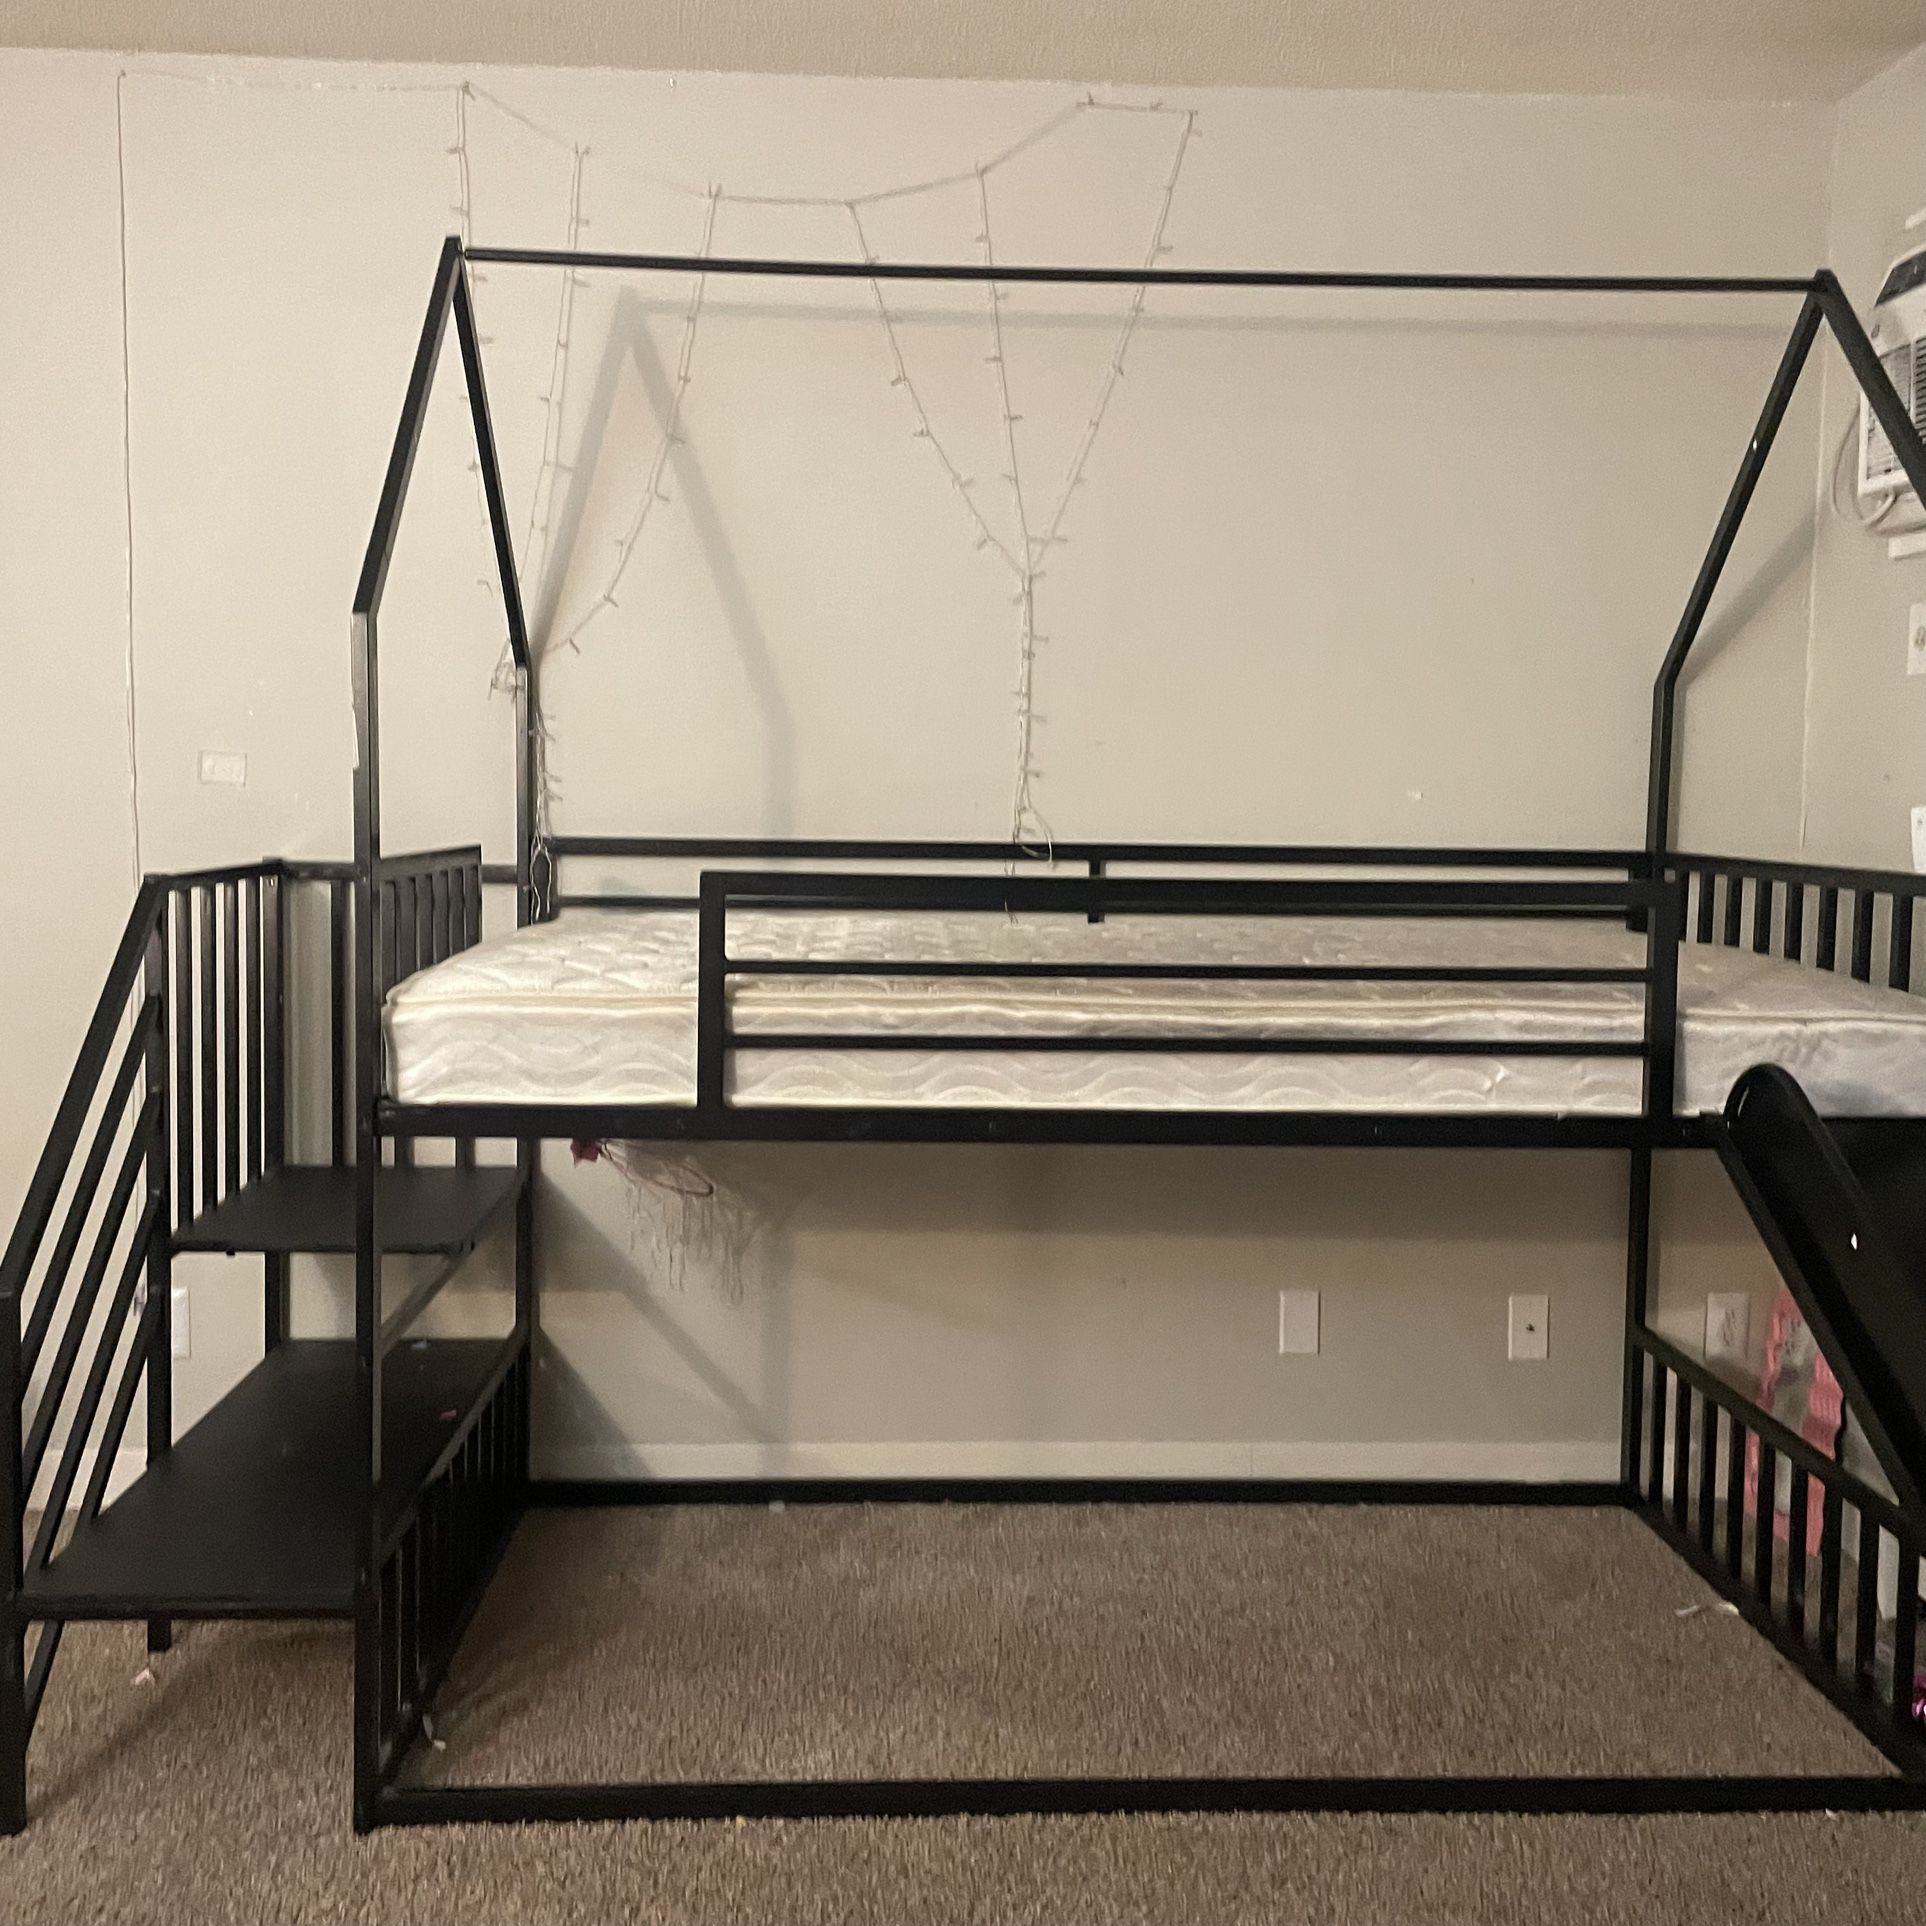 Metal House Bunk Bed with Stairs&  Slide, Kids Bunk Bed Twin Over Twin Size, Twin Sl